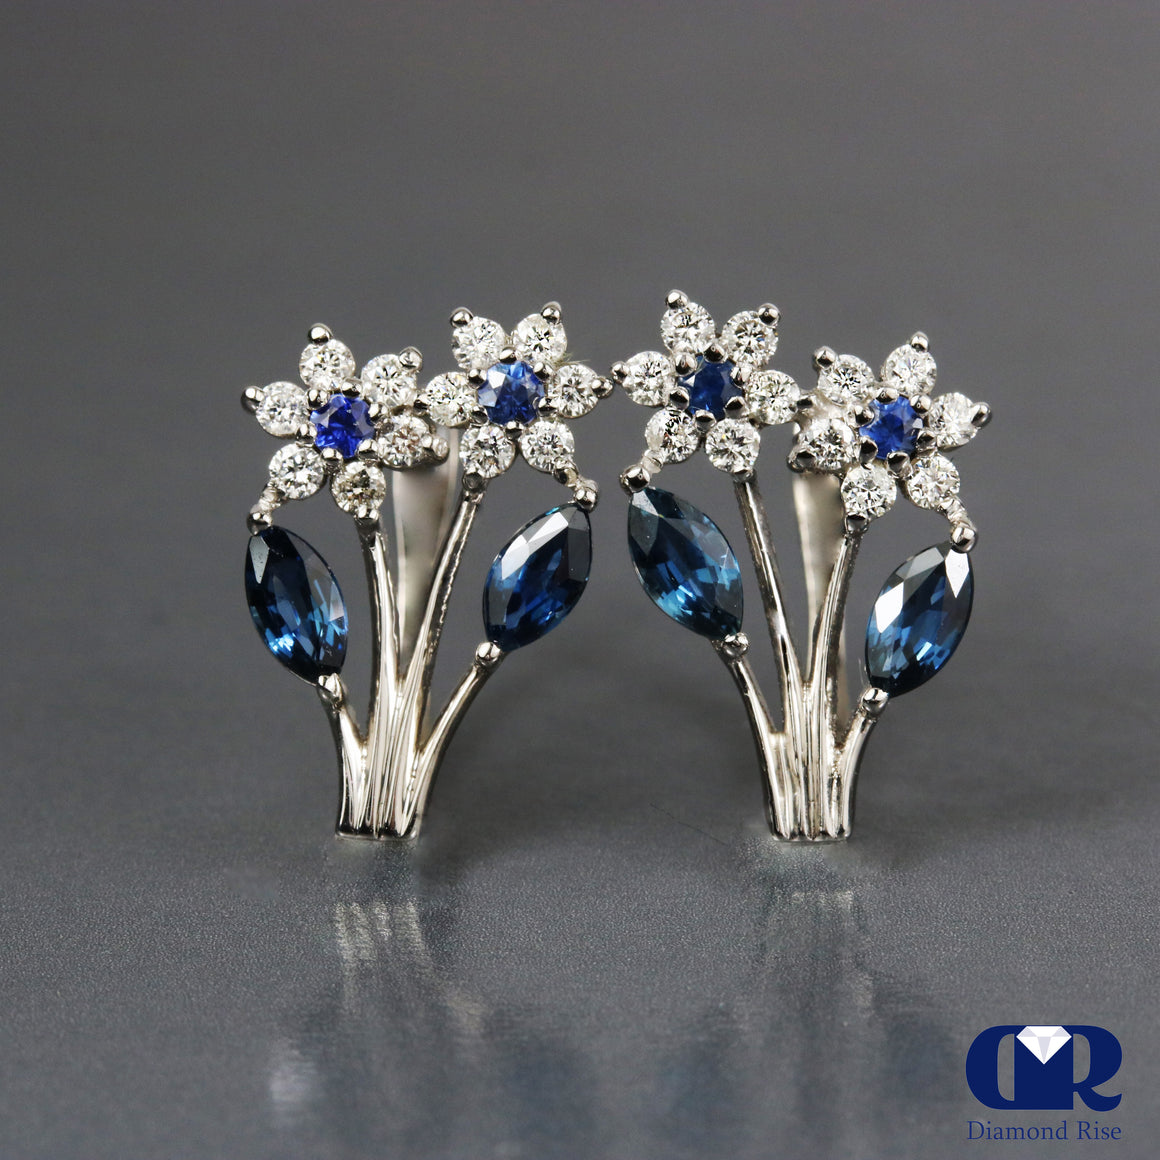 0.98 Carat Diamond & Sapphire floral Style Earrings With Lever back 14K Gold - Diamond Rise Jewelry